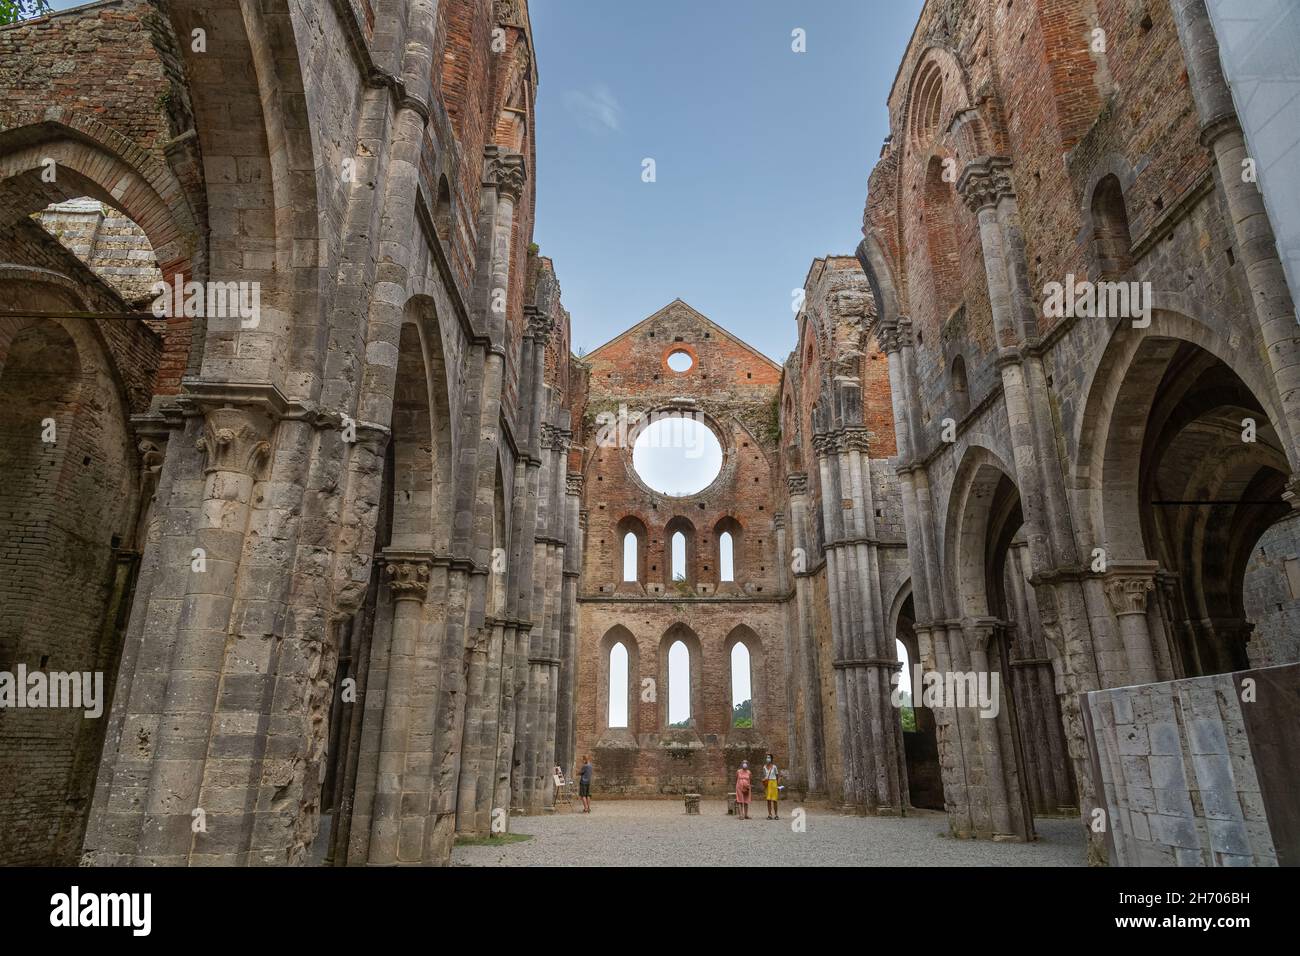 Abbazia di San Galgano (original name), the ruin of an ancient cathedral with collapsed roof, in Tuscany, Italy. Interior view Stock Photo